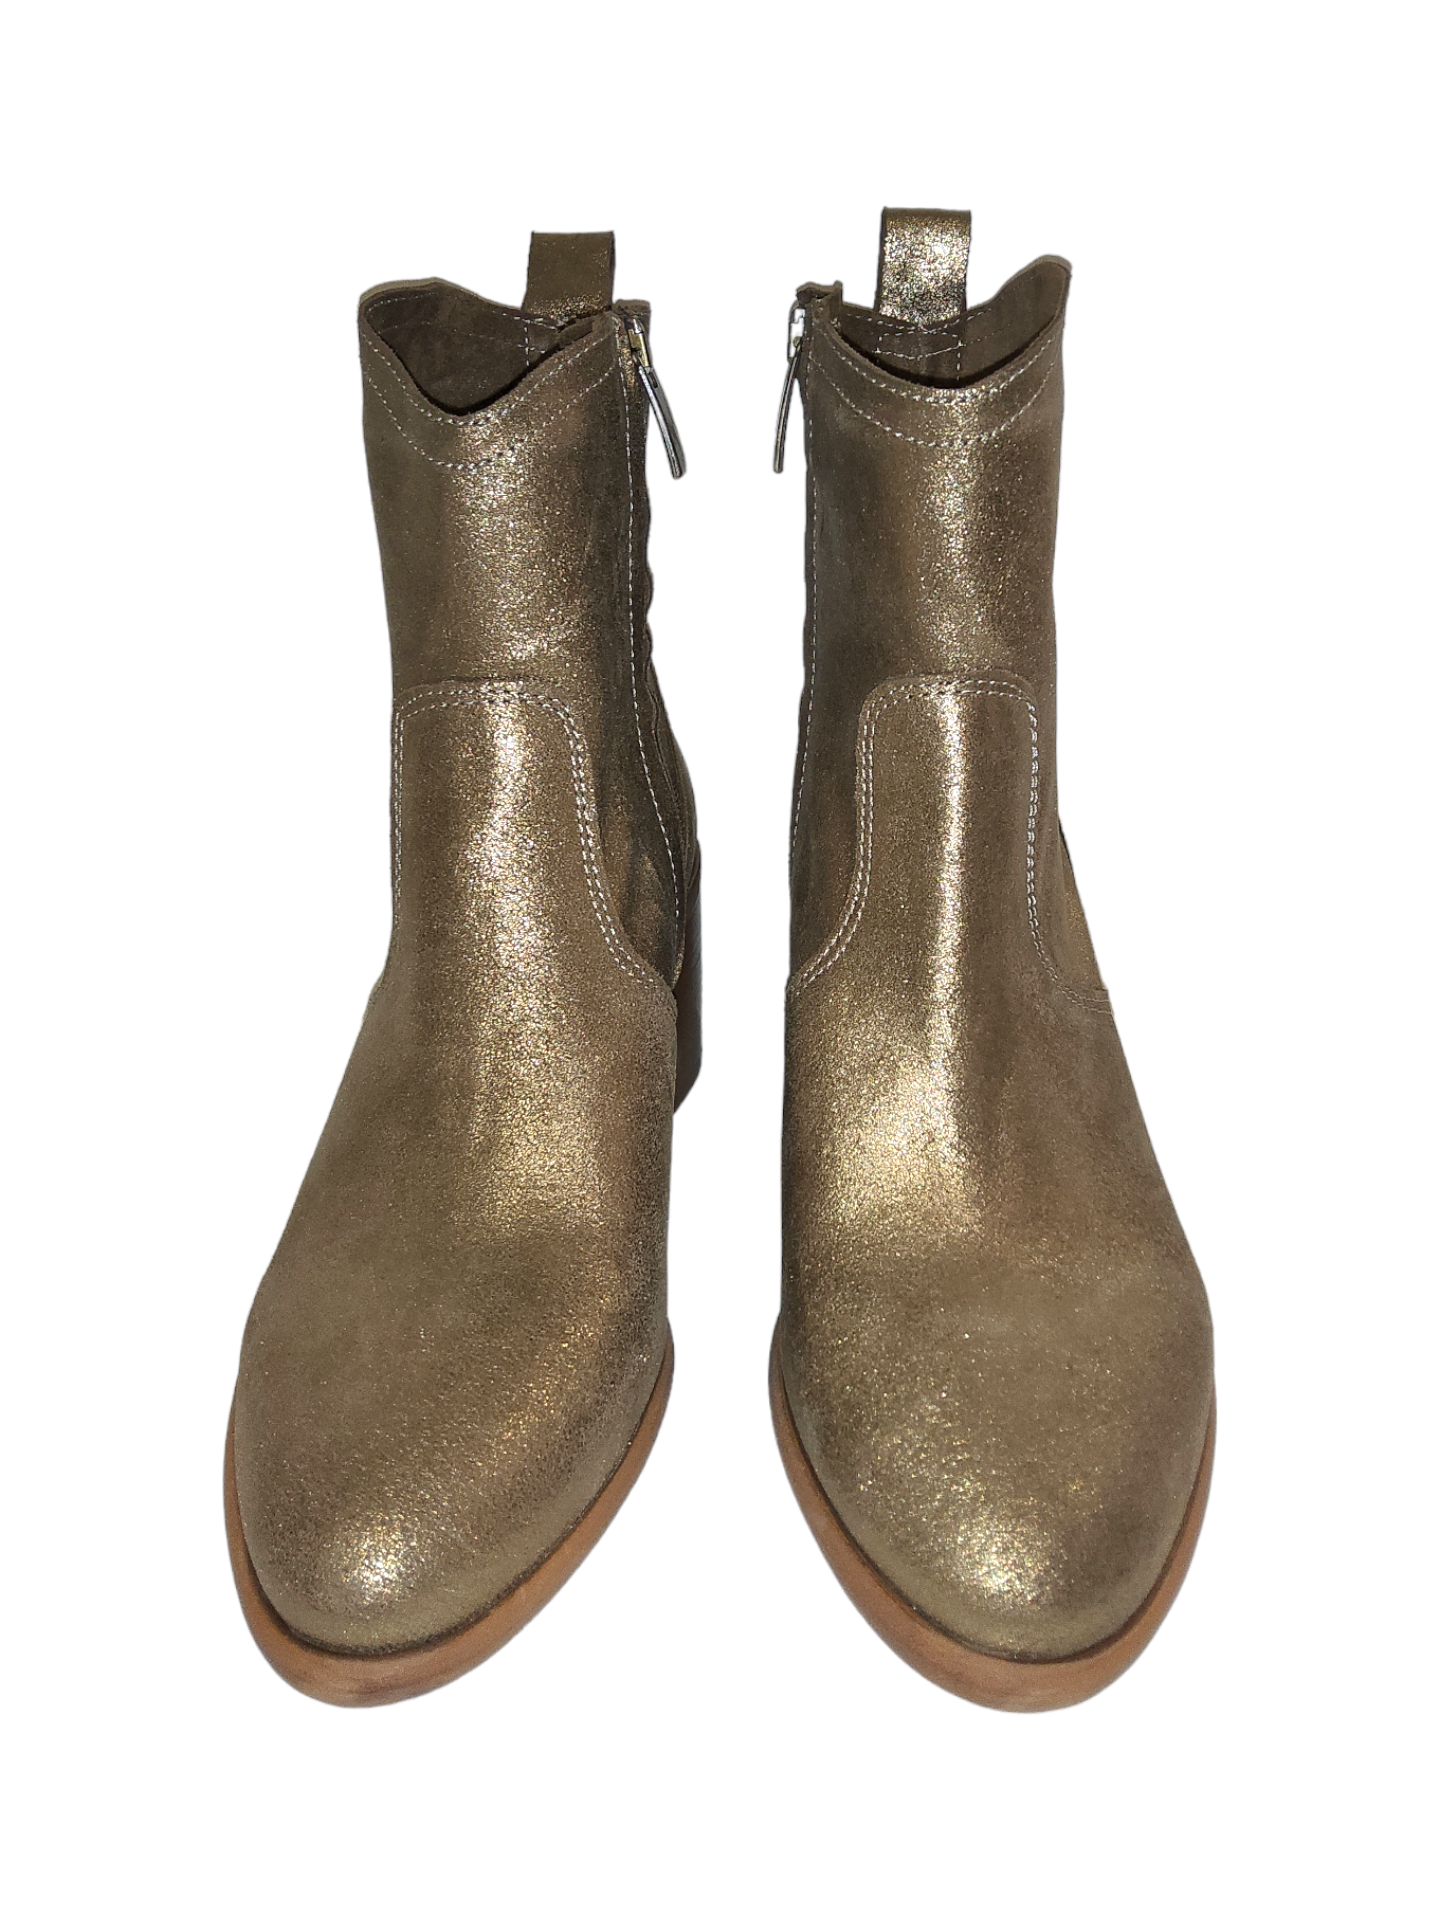 Gold leather boots